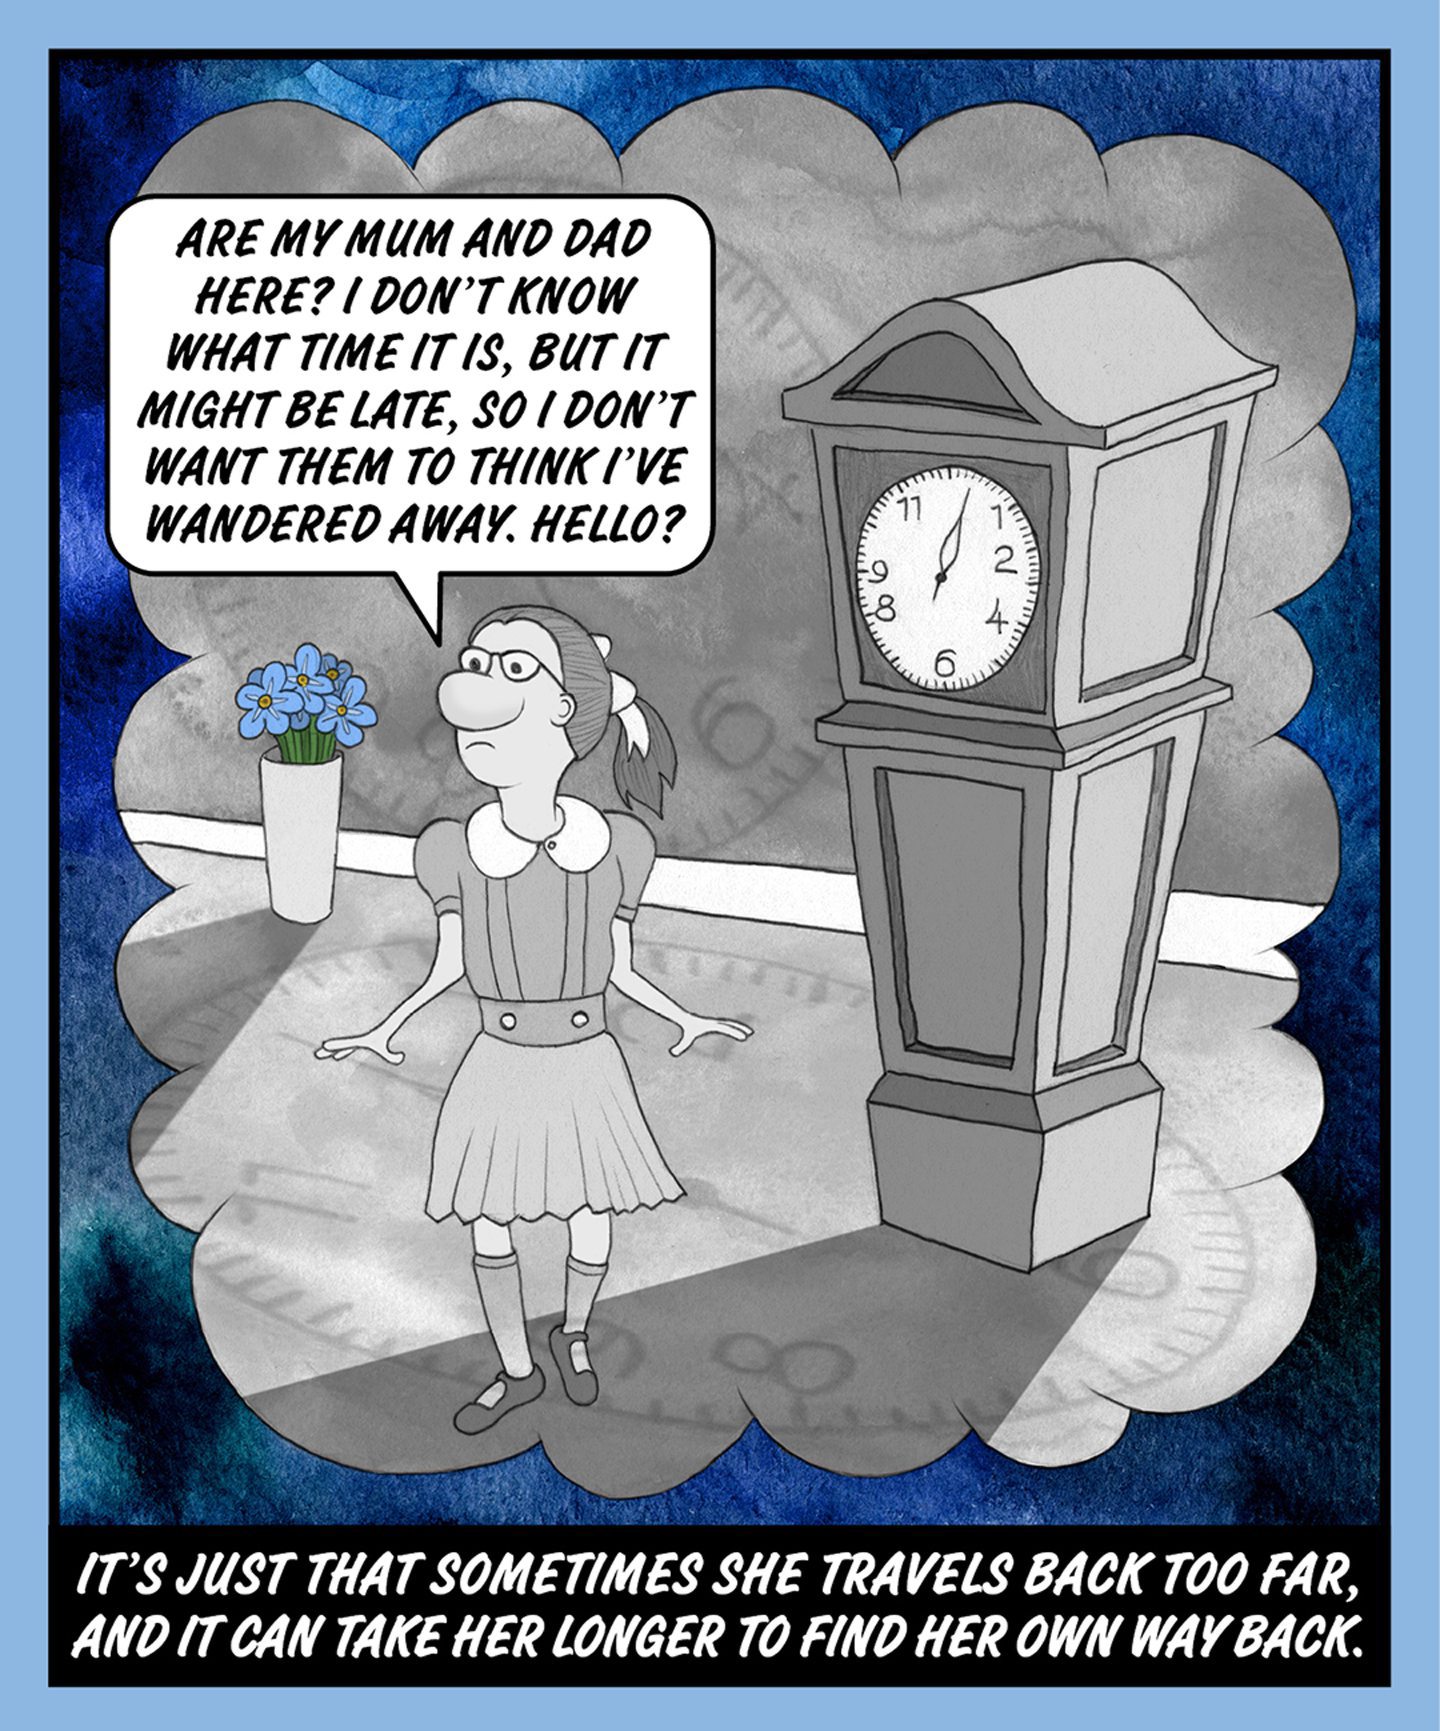 A black and white comic illustration of a young girl standing beside a clock. The speech bubble from the girl reads: ARE MY MUM AND DAD HERE? I DON'T KNOW WHAT TIME IT IS, BUT IT MIGHT BE LATE, SO I DON'T WANT THEM TO THINK I'VE WANDERED AWAY. HELLO? The text below the image reads: IT'S JUST THAT SOMETIMES SHE TRAVELS BACK TOO FAR, AND IT CAN TAKE HER LONGER TO FIND HER OWN WAY BACK.